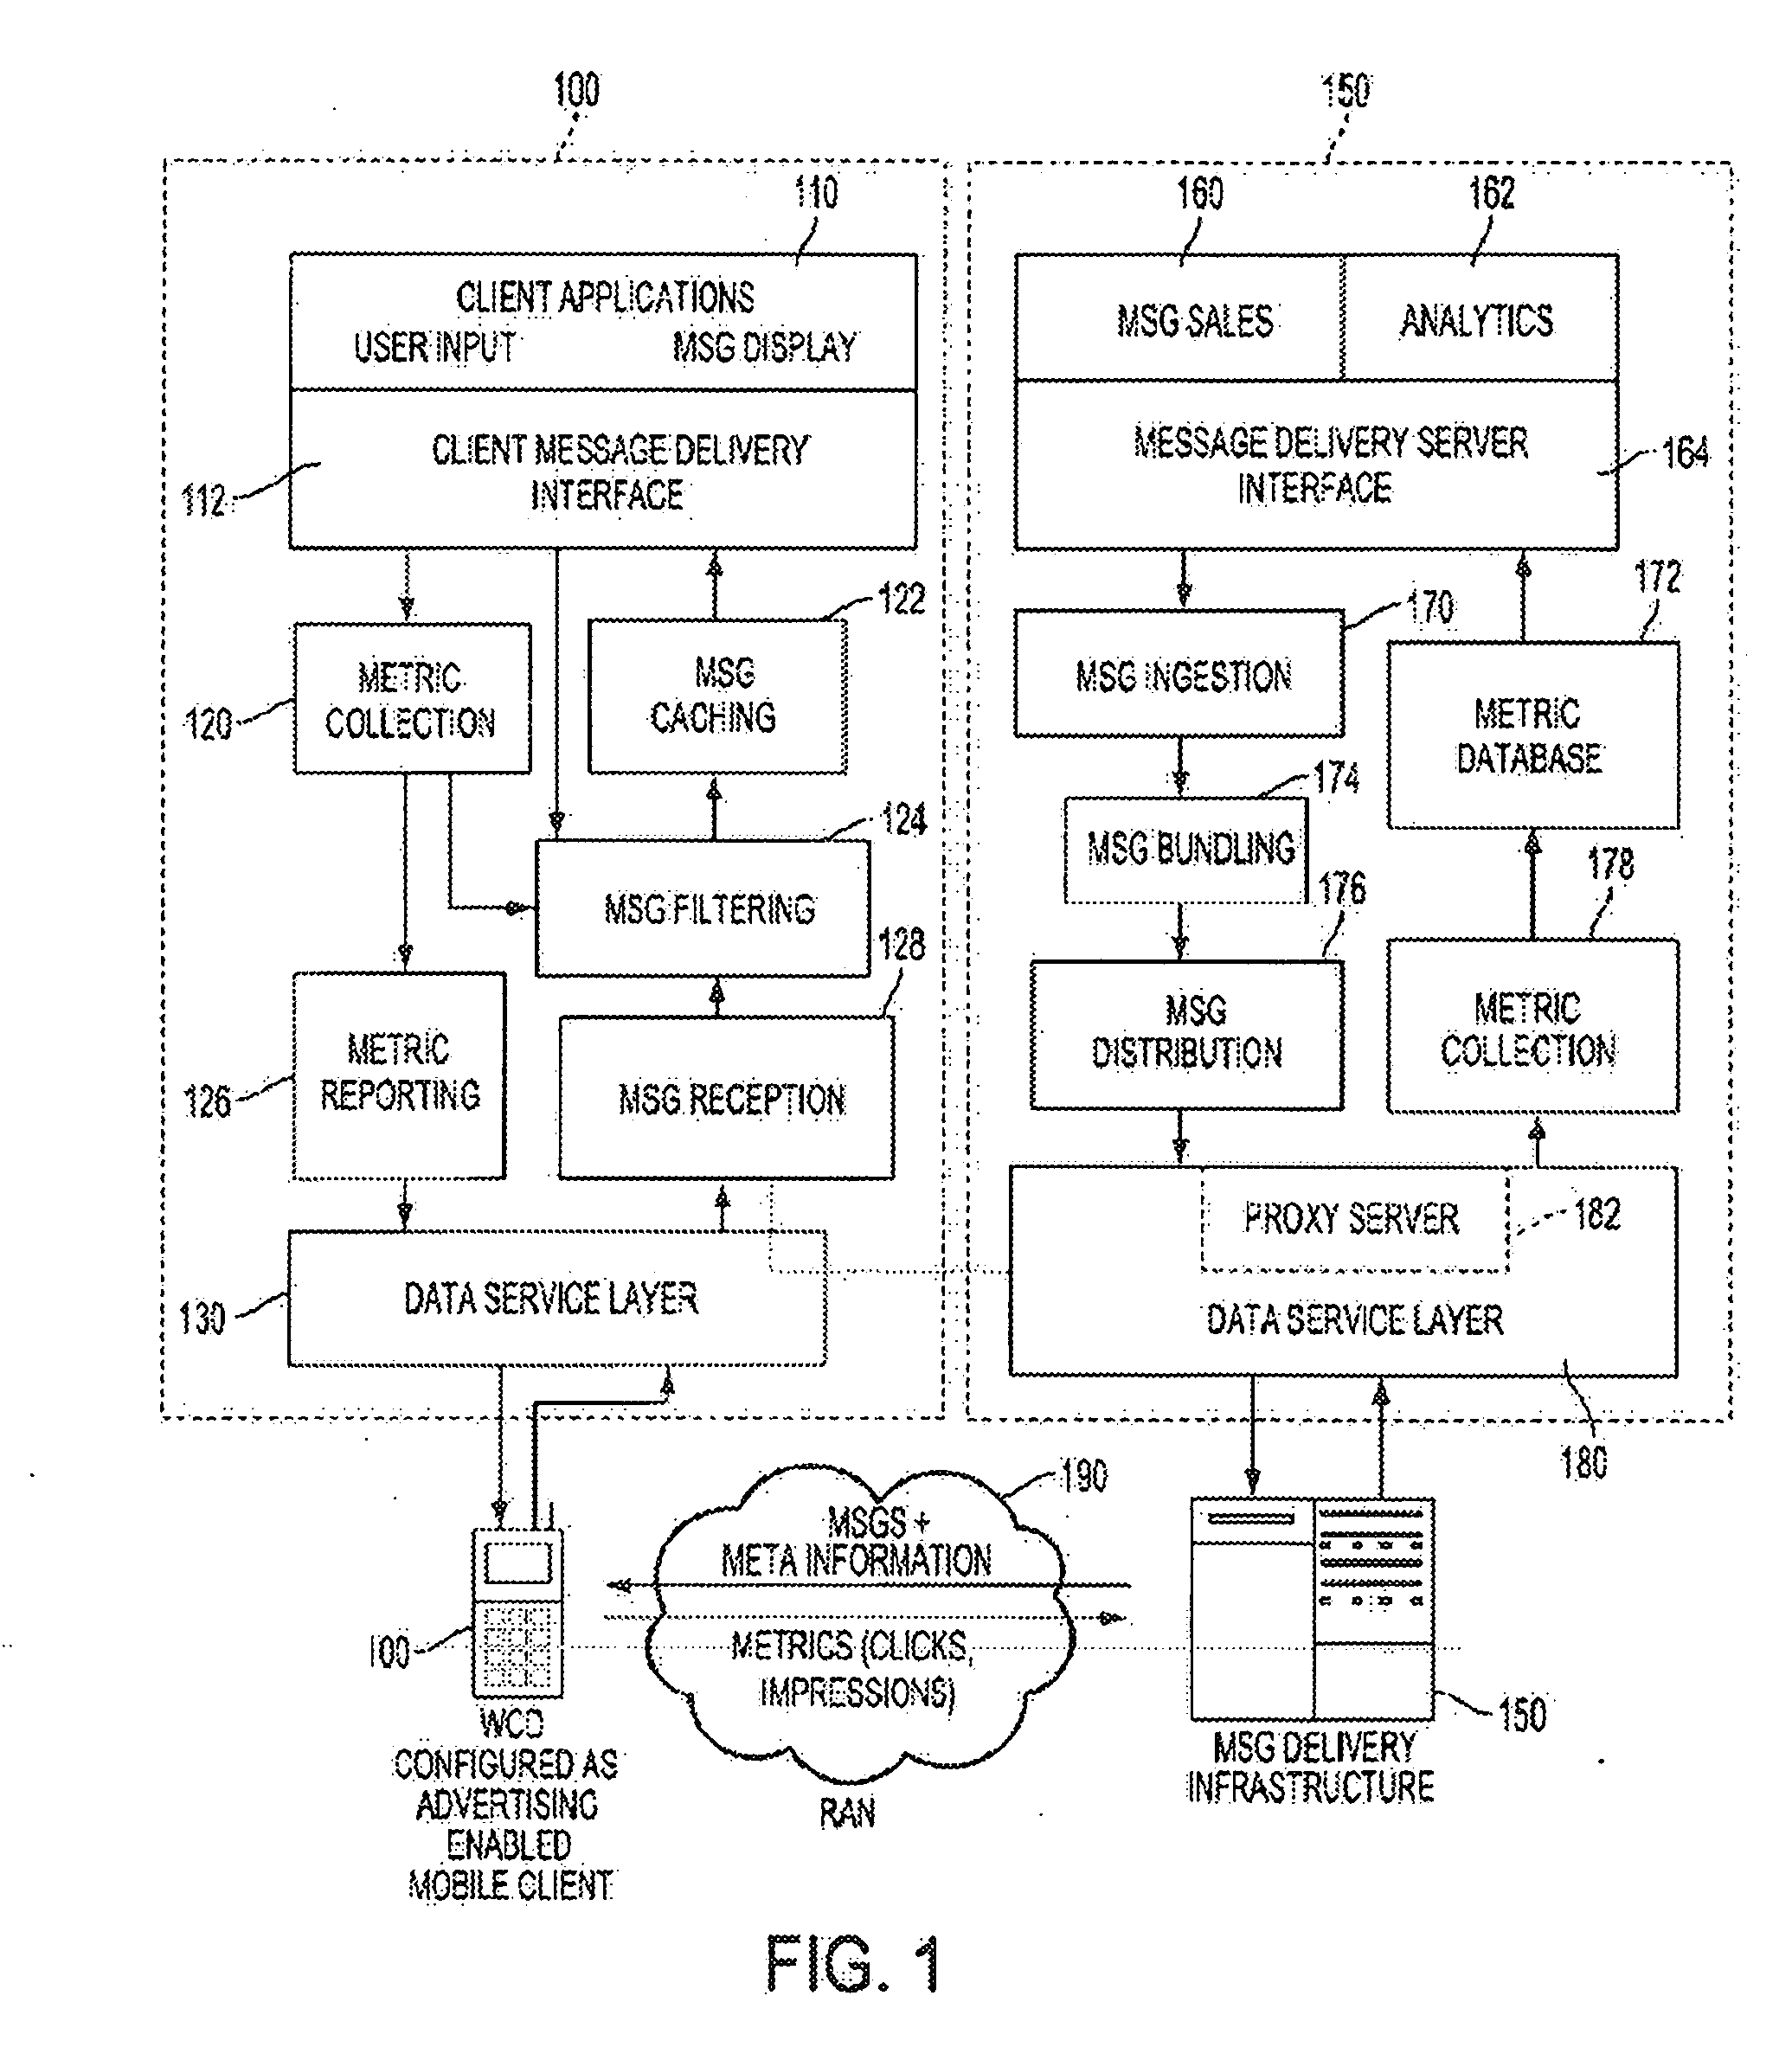 Method and system for message value calculation in a mobile environment